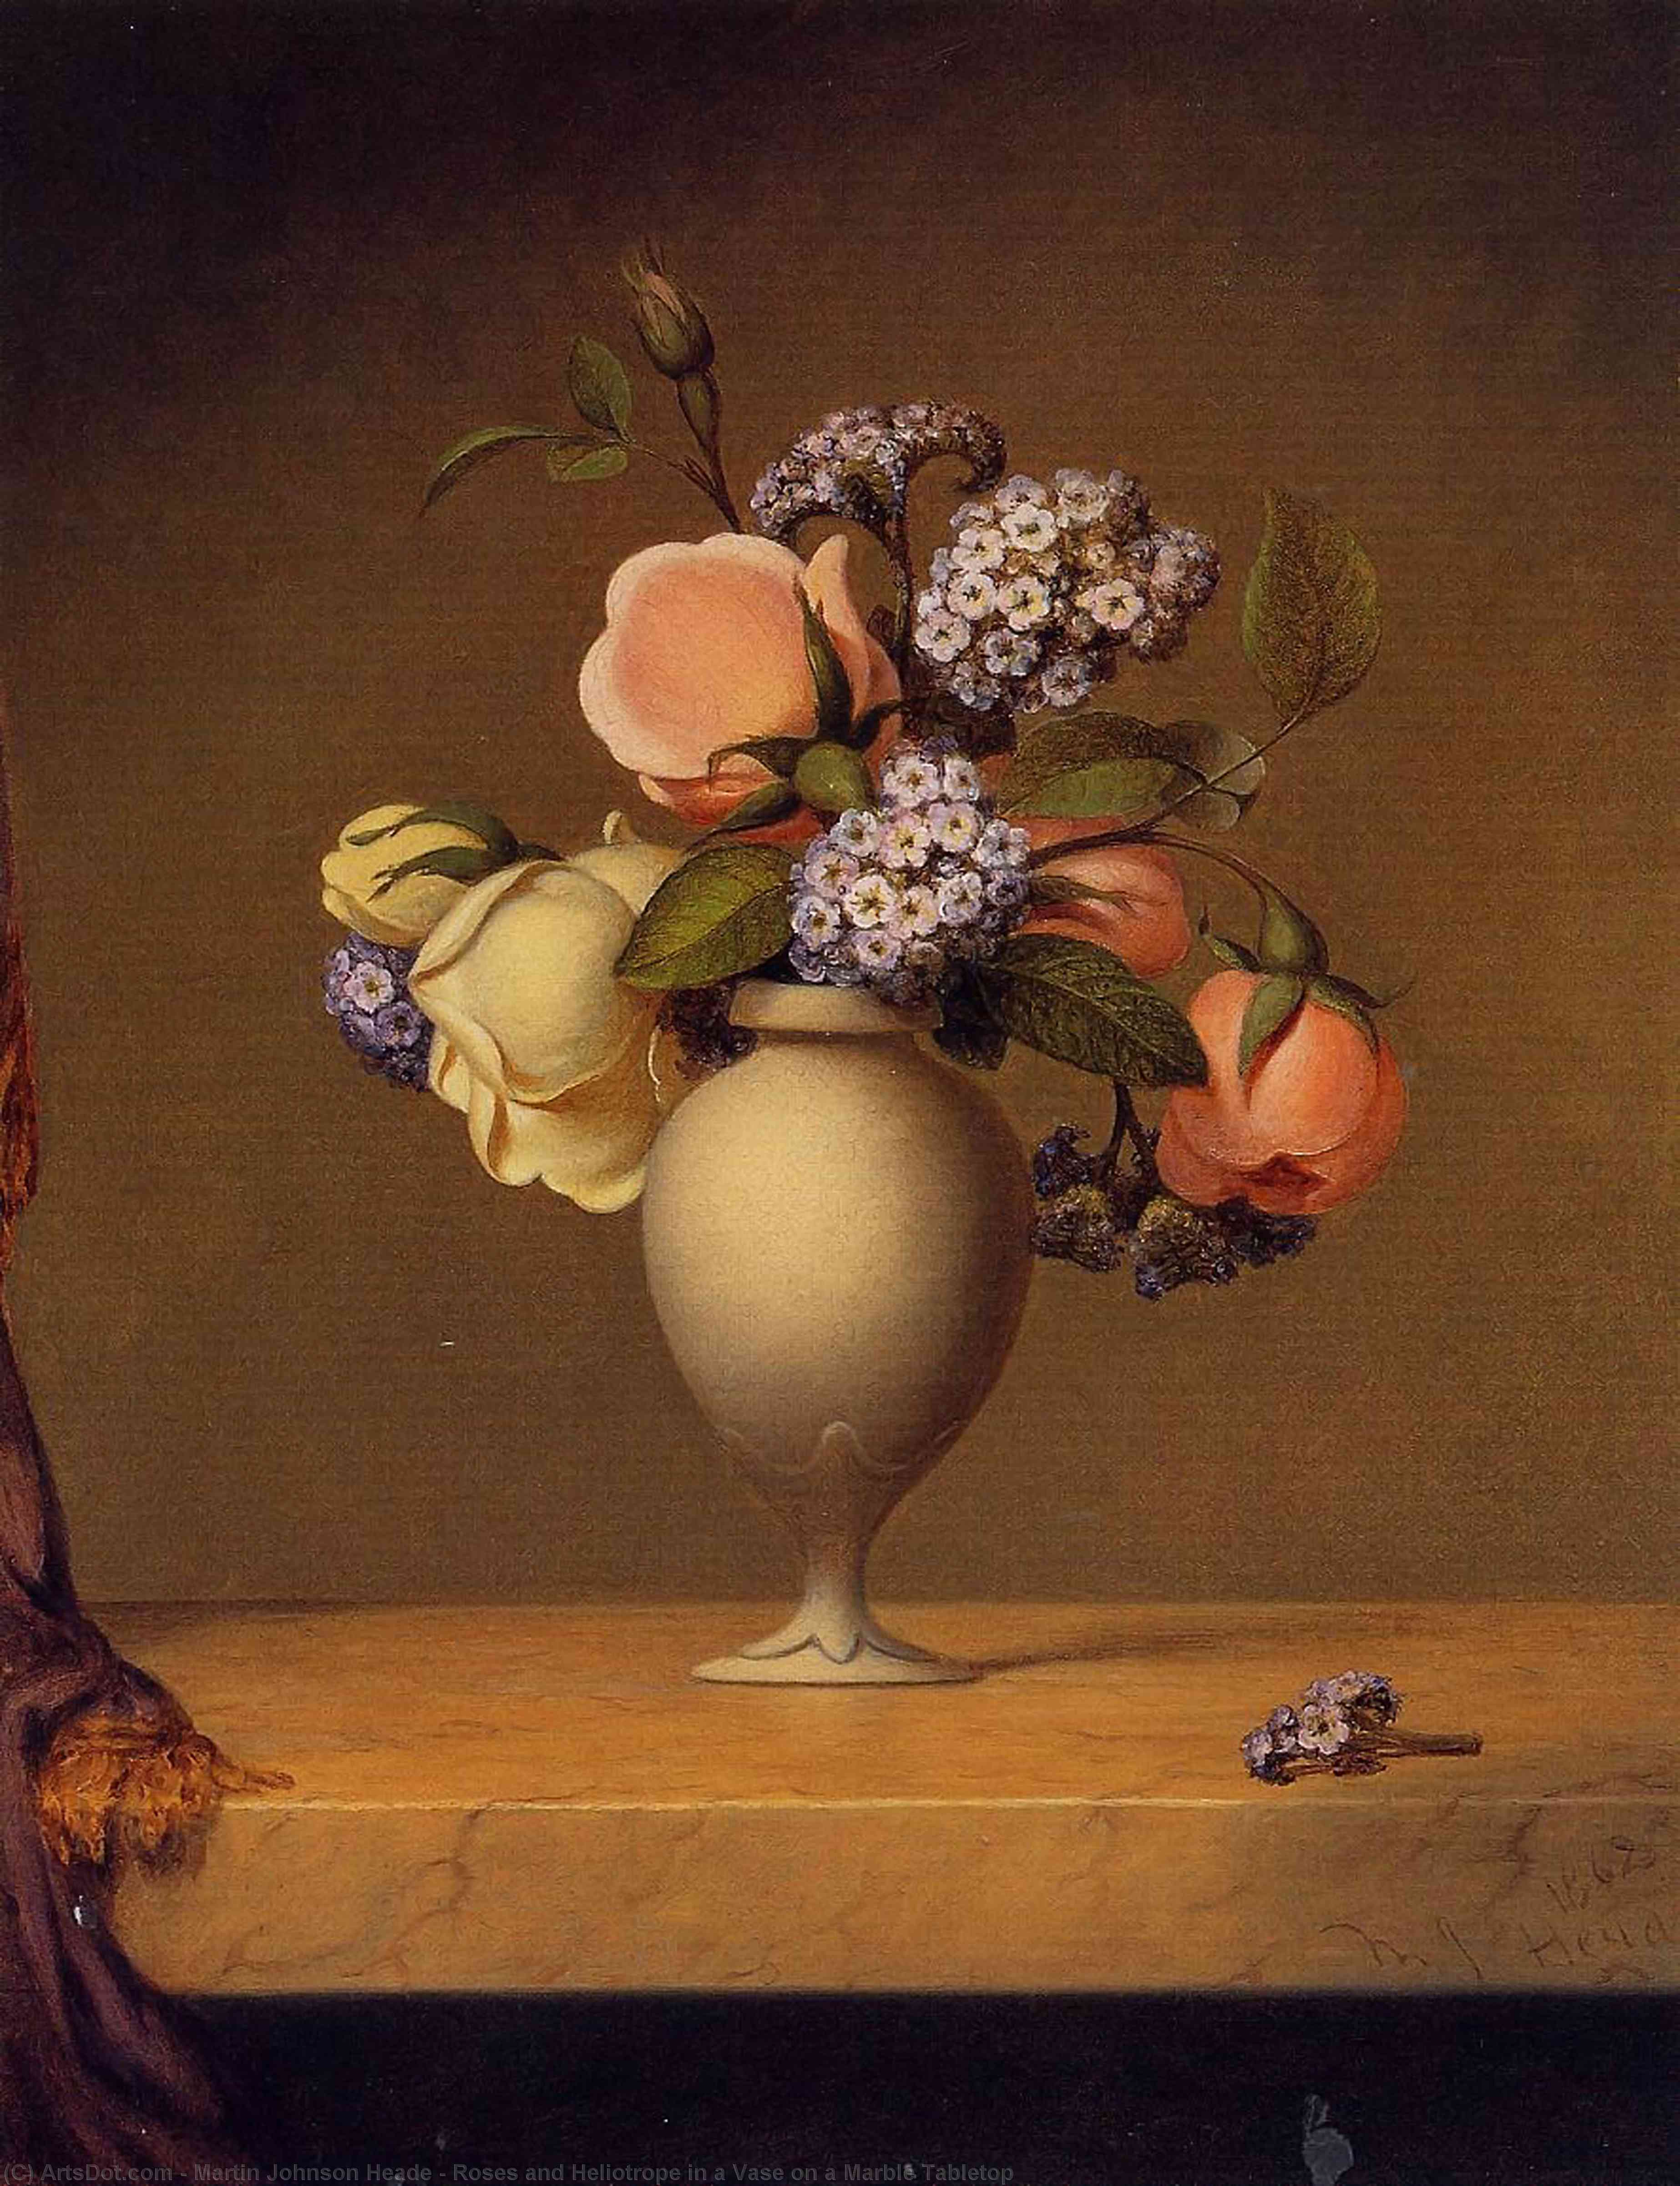 Order Paintings Reproductions Roses and Heliotrope in a Vase on a Marble Tabletop, 1862 by Martin Johnson Heade (1819-1904, United States) | ArtsDot.com